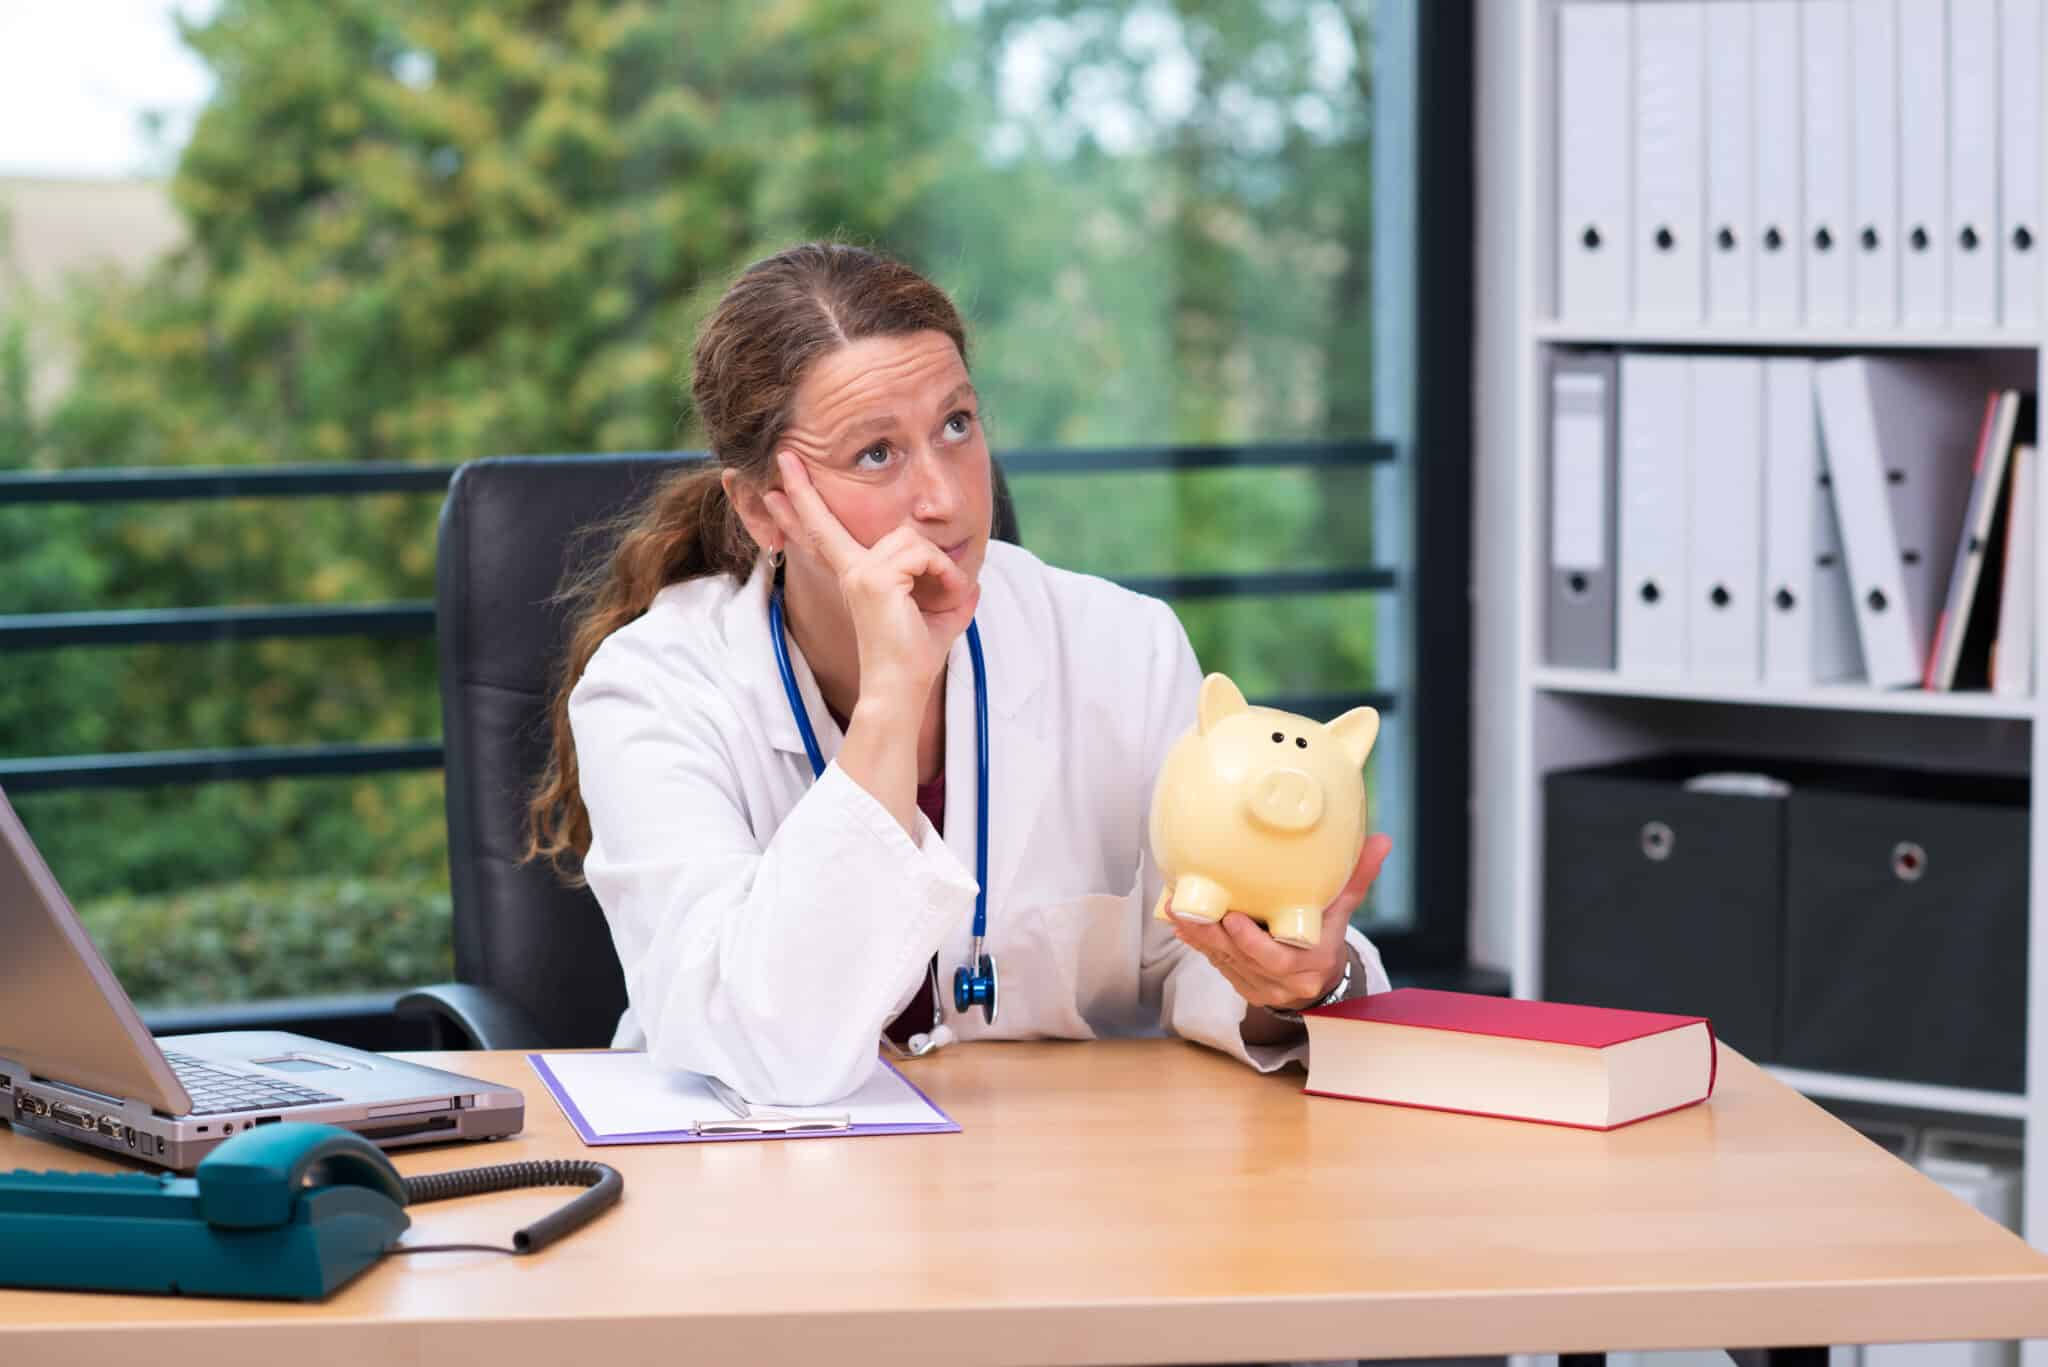 Doctor with piggy bank ponders a productivity boost & more RVUs with medical transcription services.